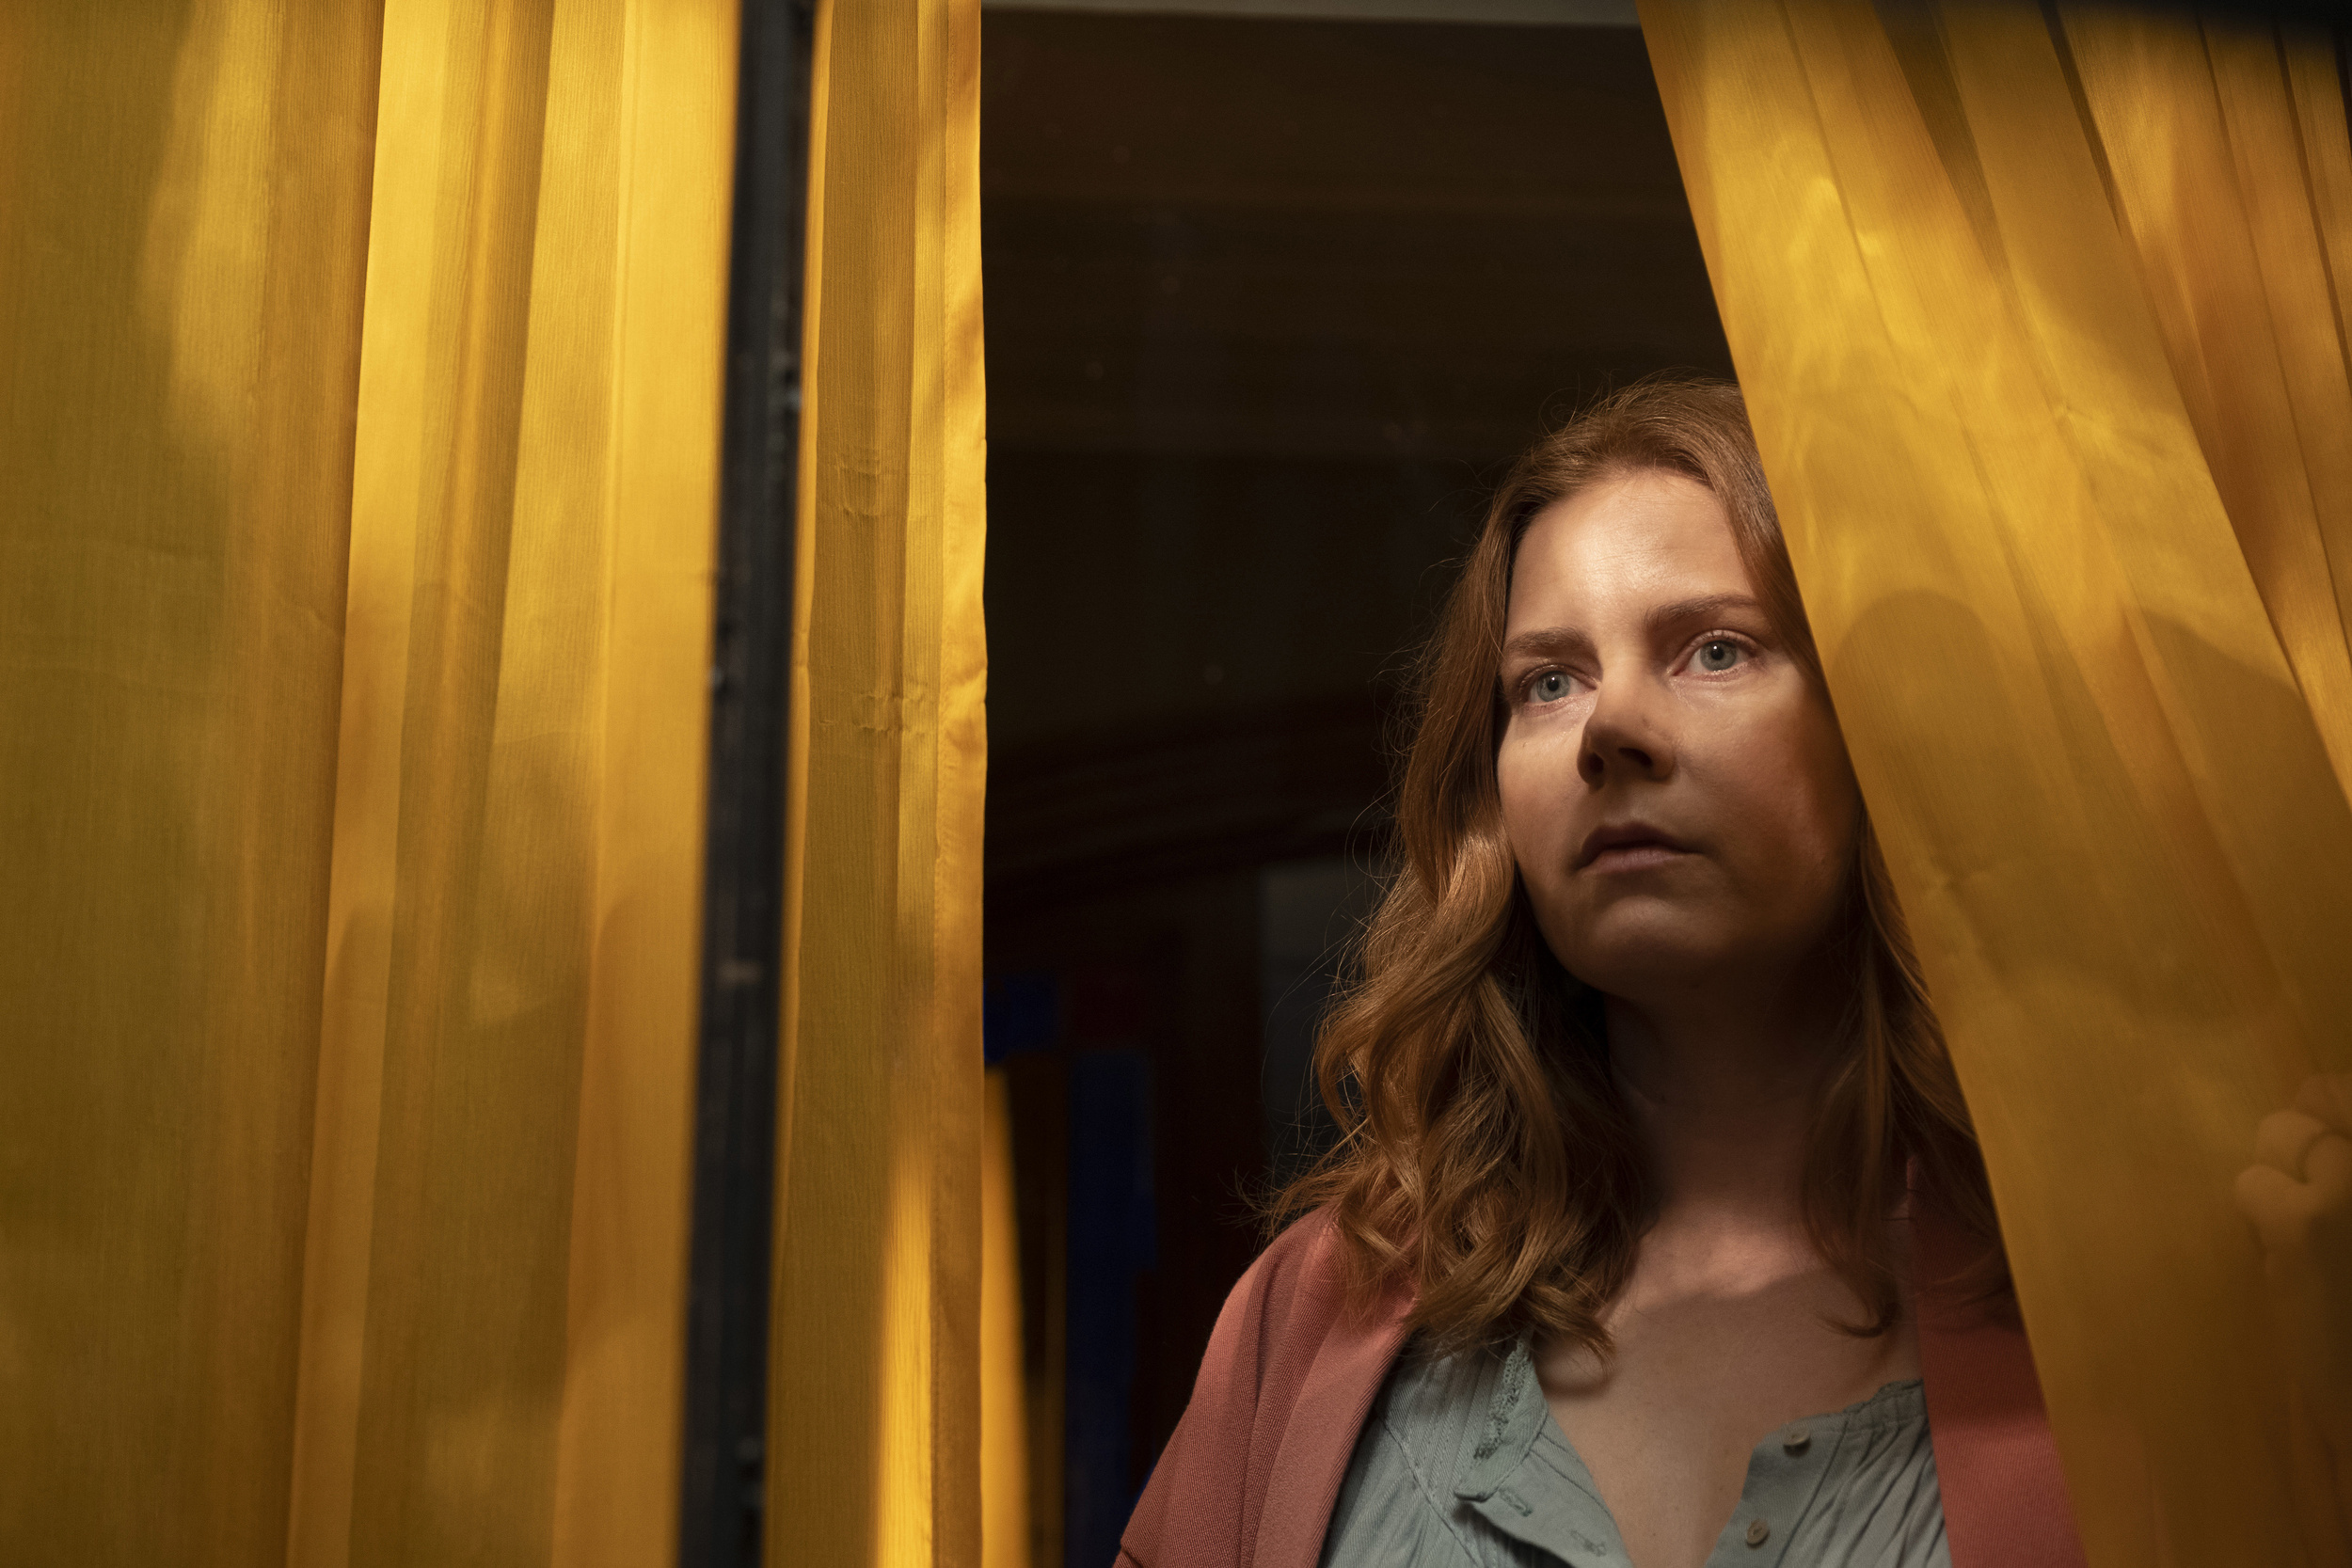 <p>In the wake of thrillers like "Gone Girl" and "The Girl on the Train," we got "The Woman in the Window," a 2018 novel that topped the 'New York Times" bestseller. The movie adaption came to Netflix with Oscar nominee Amy Adams as the lead. And yet, the movie was basically not talked about, and when "The Woman in the Window" did get mentioned it was usually with disparagement.</p><p><a href='https://www.msn.com/en-us/community/channel/vid-cj9pqbr0vn9in2b6ddcd8sfgpfq6x6utp44fssrv6mc2gtybw0us'>Follow us on MSN to see more of our exclusive entertainment content.</a></p>